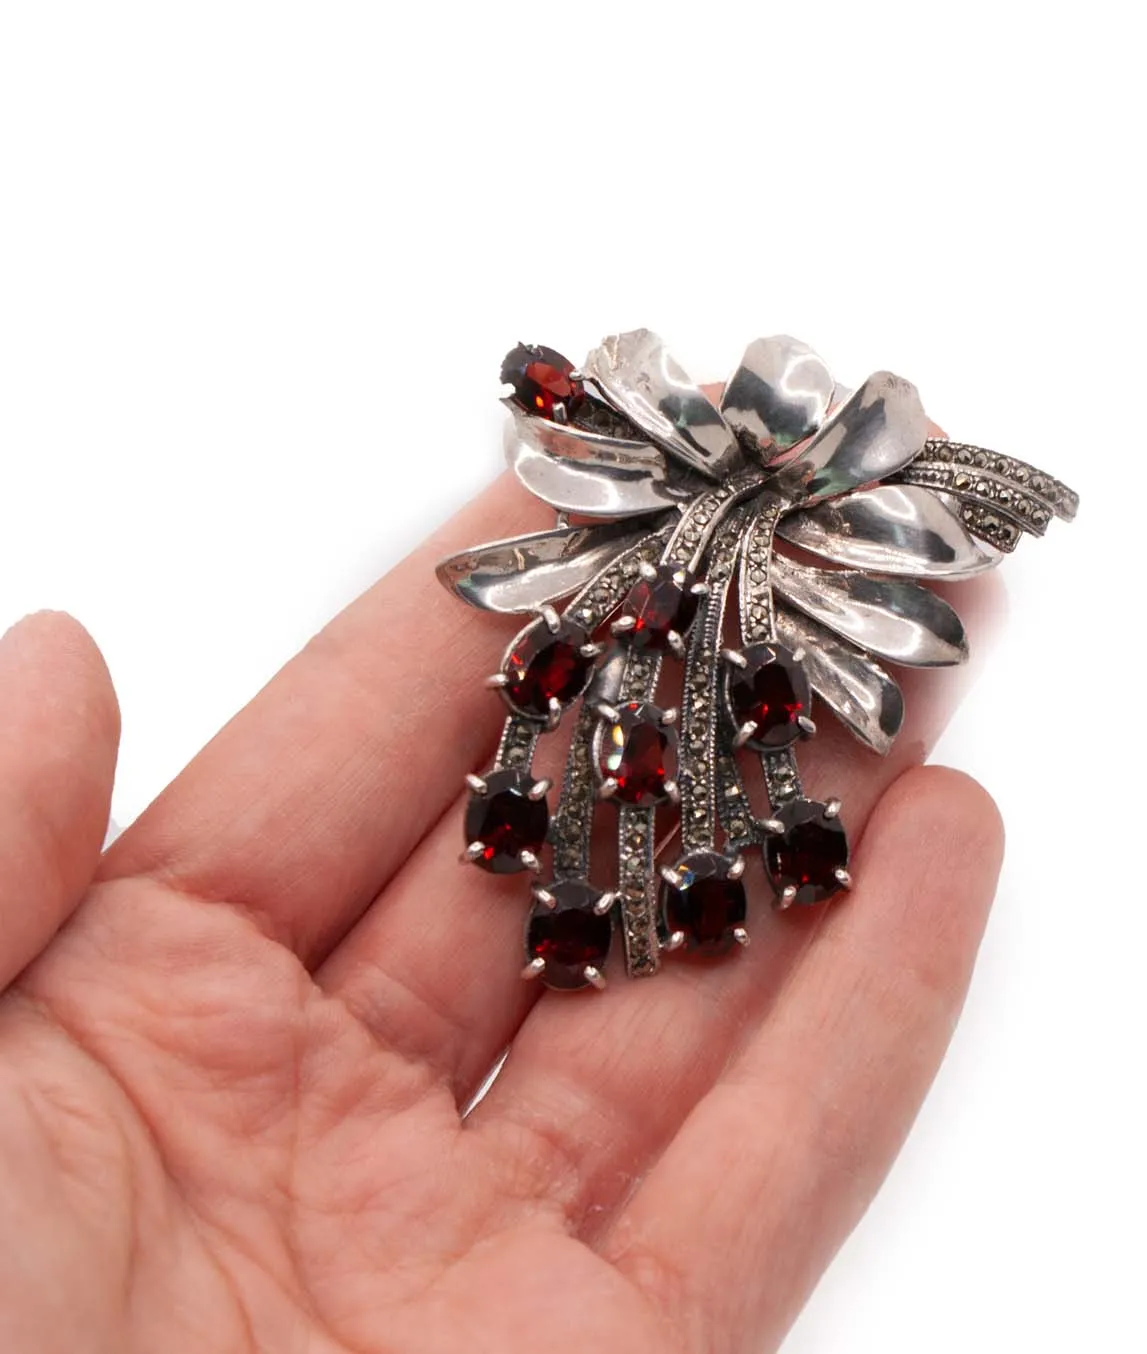 Silver and marcasite brooch with garnet red paste stones held in hand